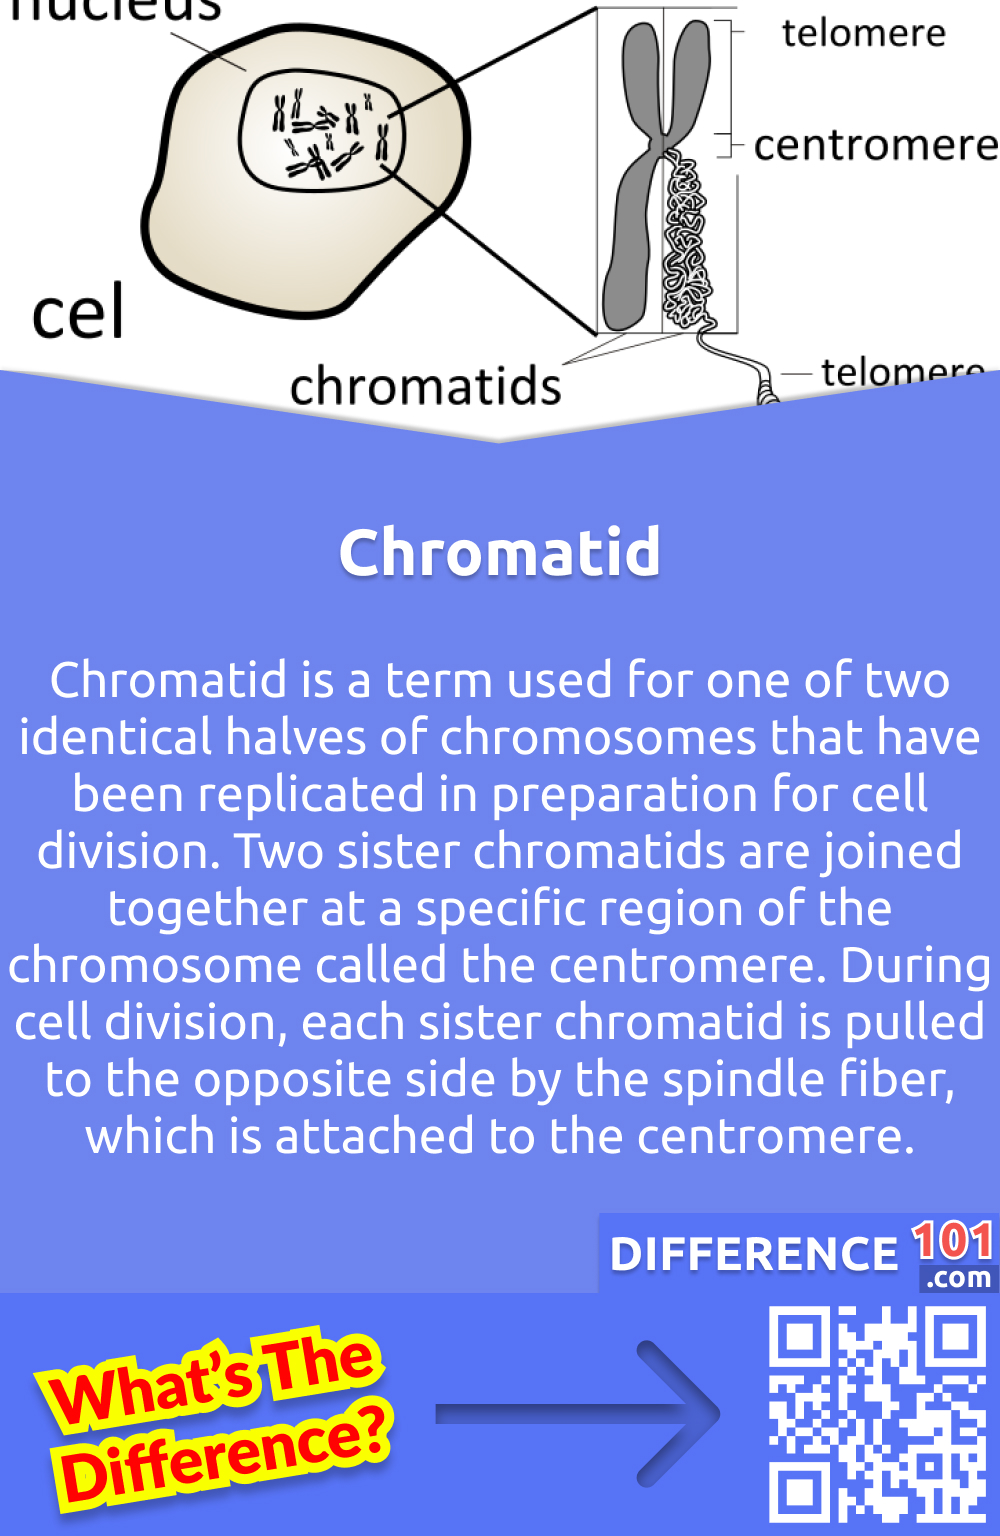 What Is Chromatid? Chromatid is a term used for one of two identical halves of chromosomes that have been replicated in preparation for cell division. Two sister chromatids are joined together at a specific region of the chromosome called the centromere. During cell division, each sister chromatid is pulled to the opposite side by the spindle fiber, which is attached to the centromere. And when the cells divide into two, it makes daughter cells with identical DNA. This cell replication is very important during growth and for replacing the cells which got damaged. For example, the cut heals when a person gets a cut on his skin. It is because of cell replication that the new cells are exact copies of the old ones. The chromosomes also contain copies in the form of chromatids which contain special structures for separating daughter cells.